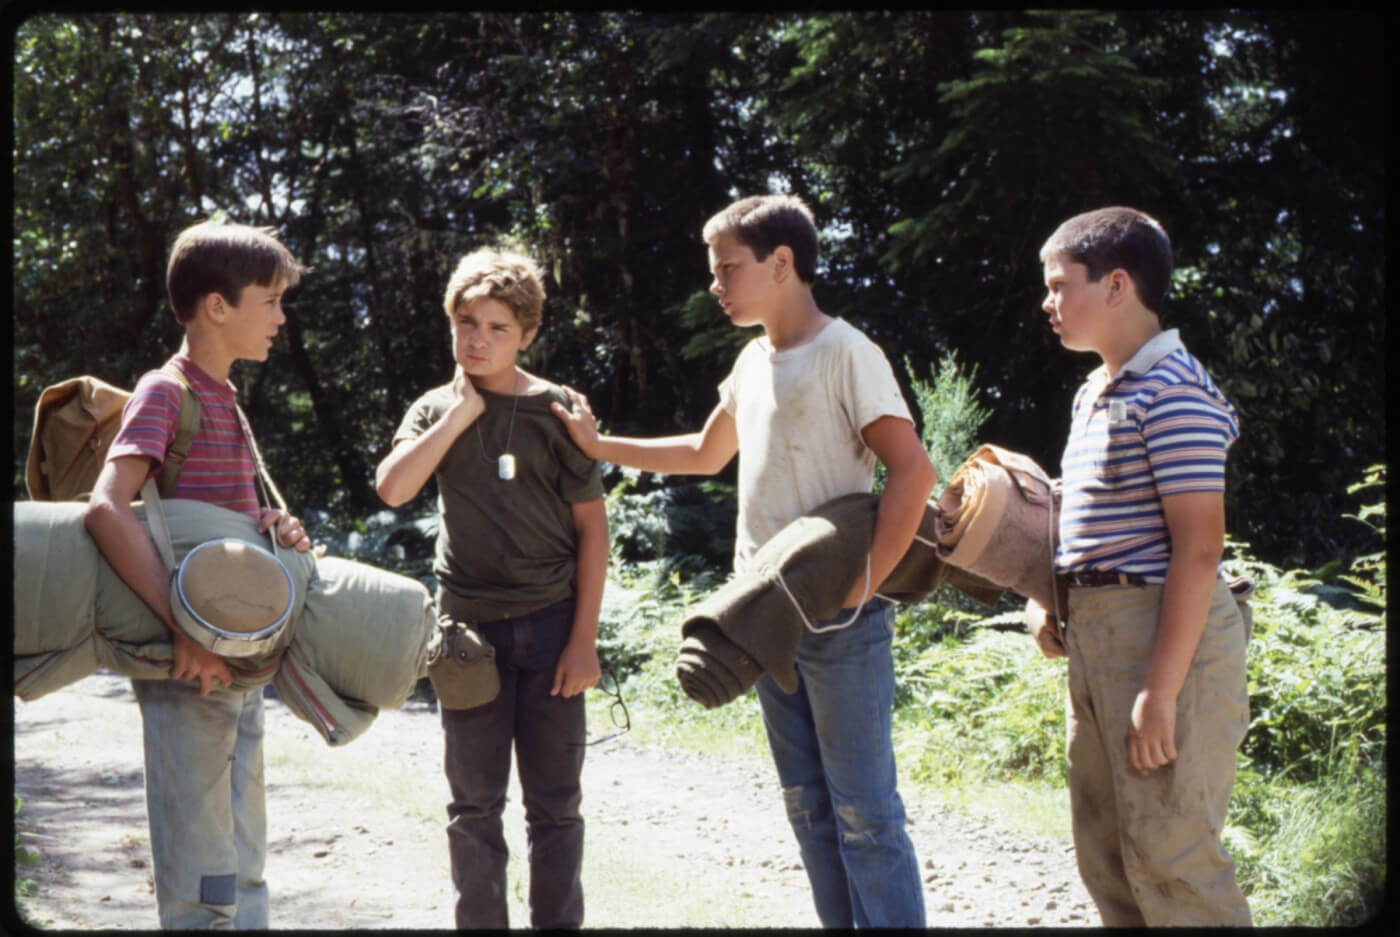 The kids from Stand by Me wishing they had bought some EDC Camp gear from Gallantry